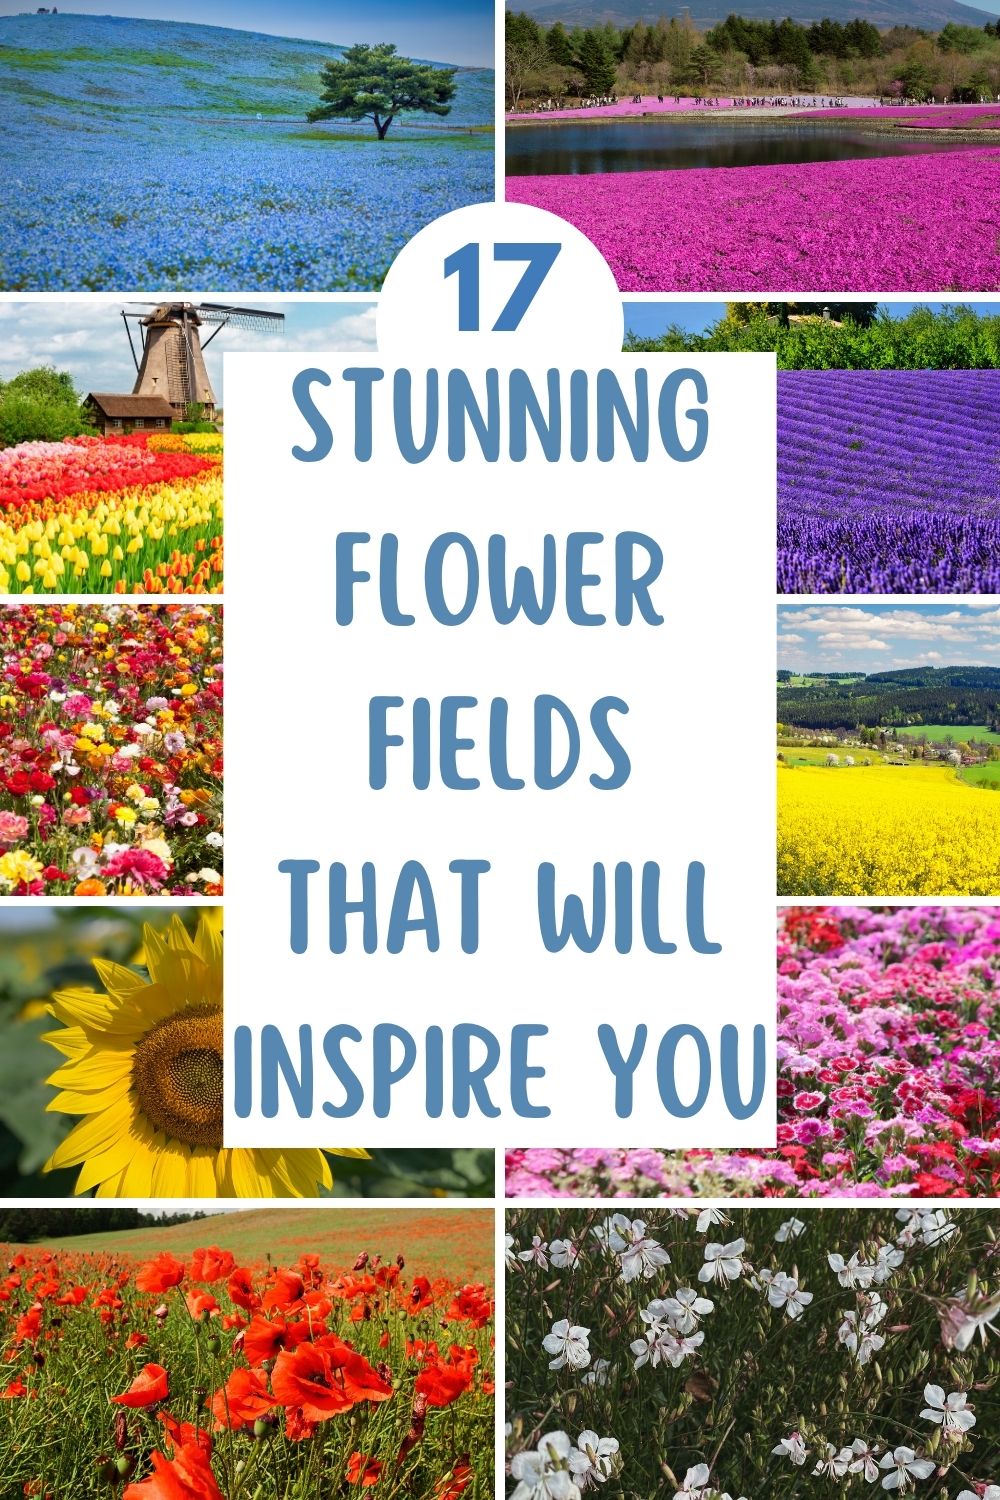 17 Stunning Flower Fields That Will Inspire You.